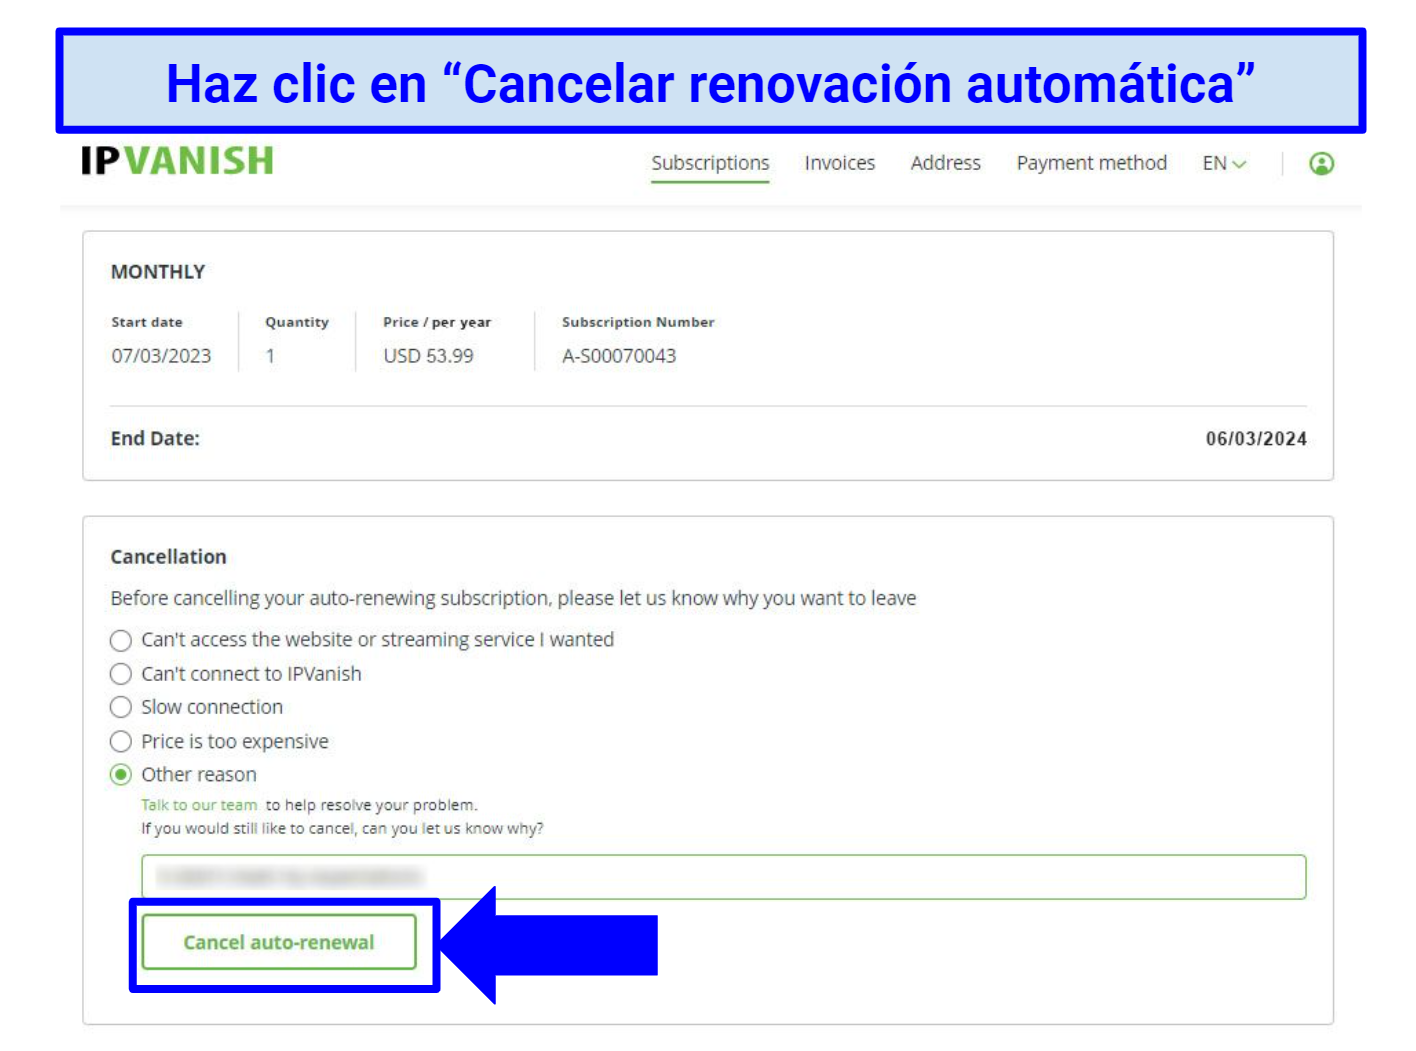 Screenshot showing the IPVanish cancellation confirmation page